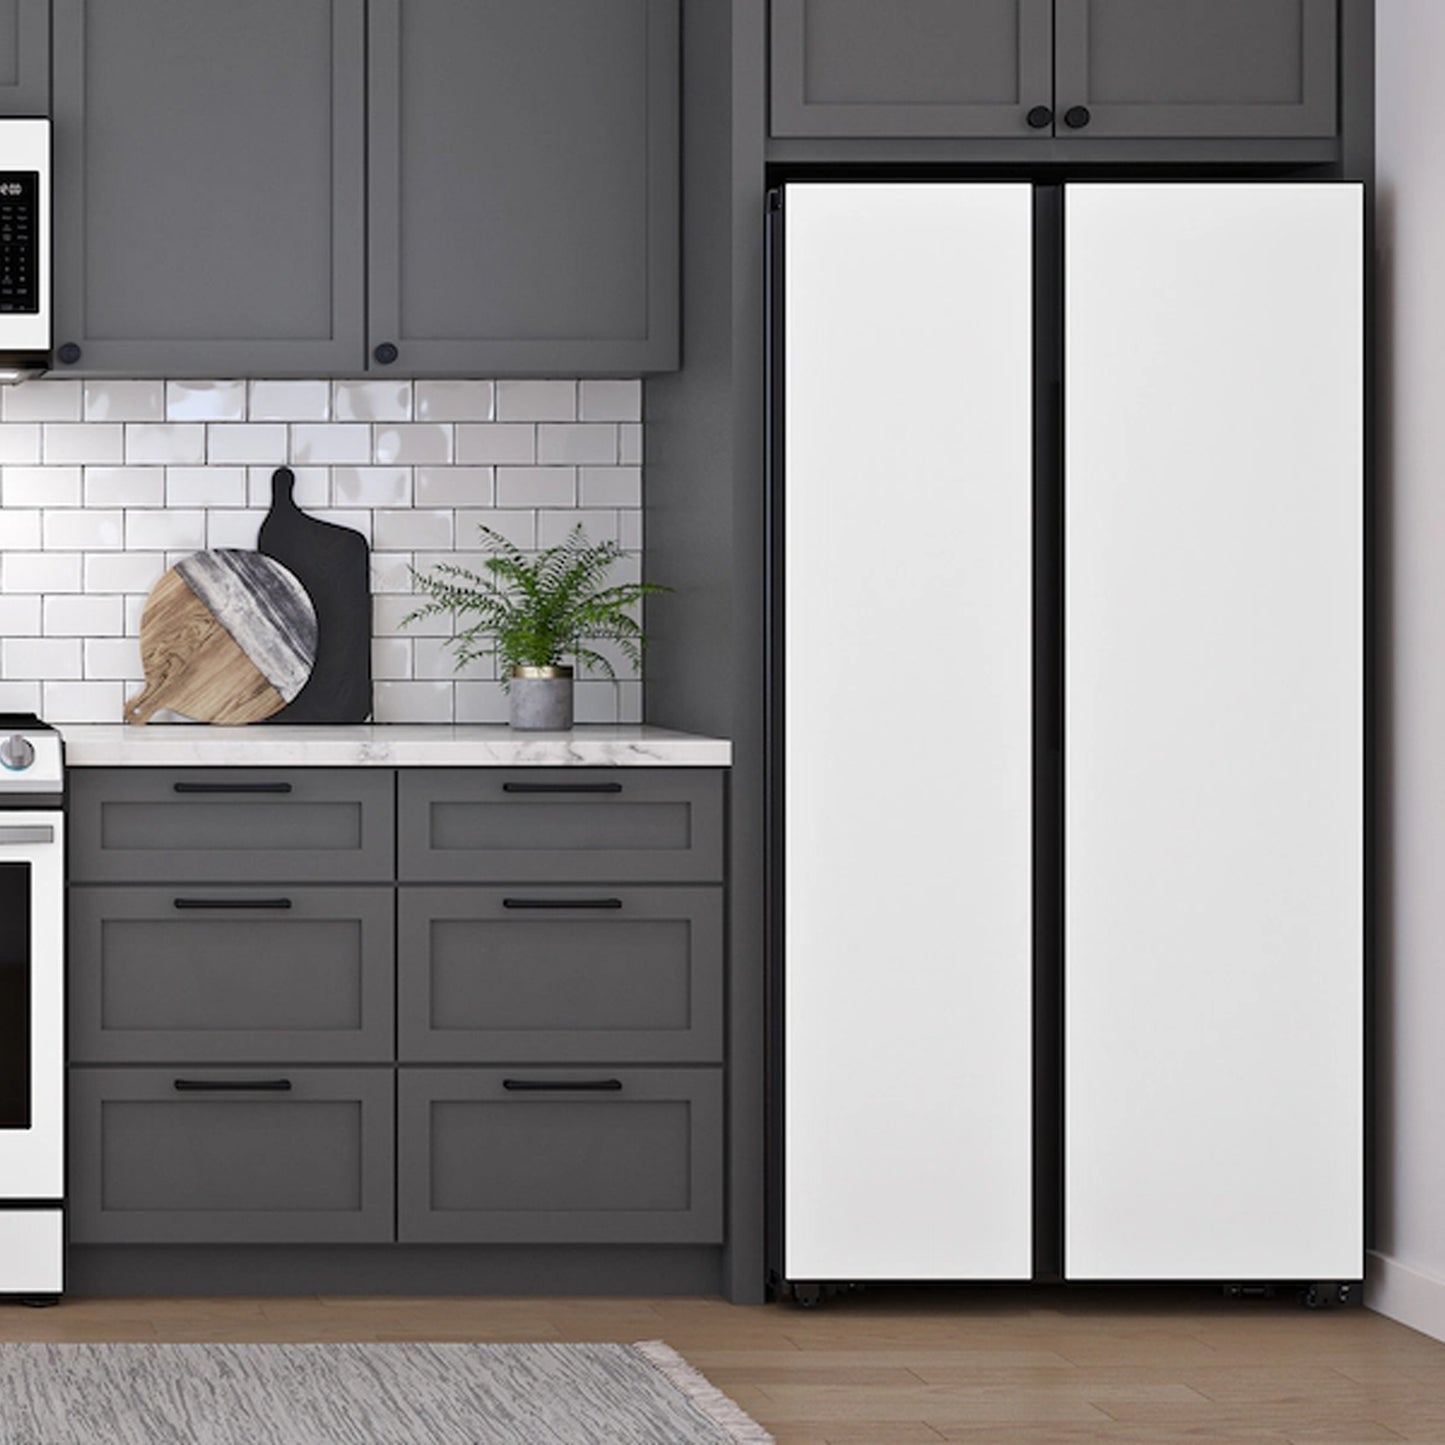 Bespoke Side-by-Side 28 cu. ft. Refrigerator with Beverage Center™ in White Glass.